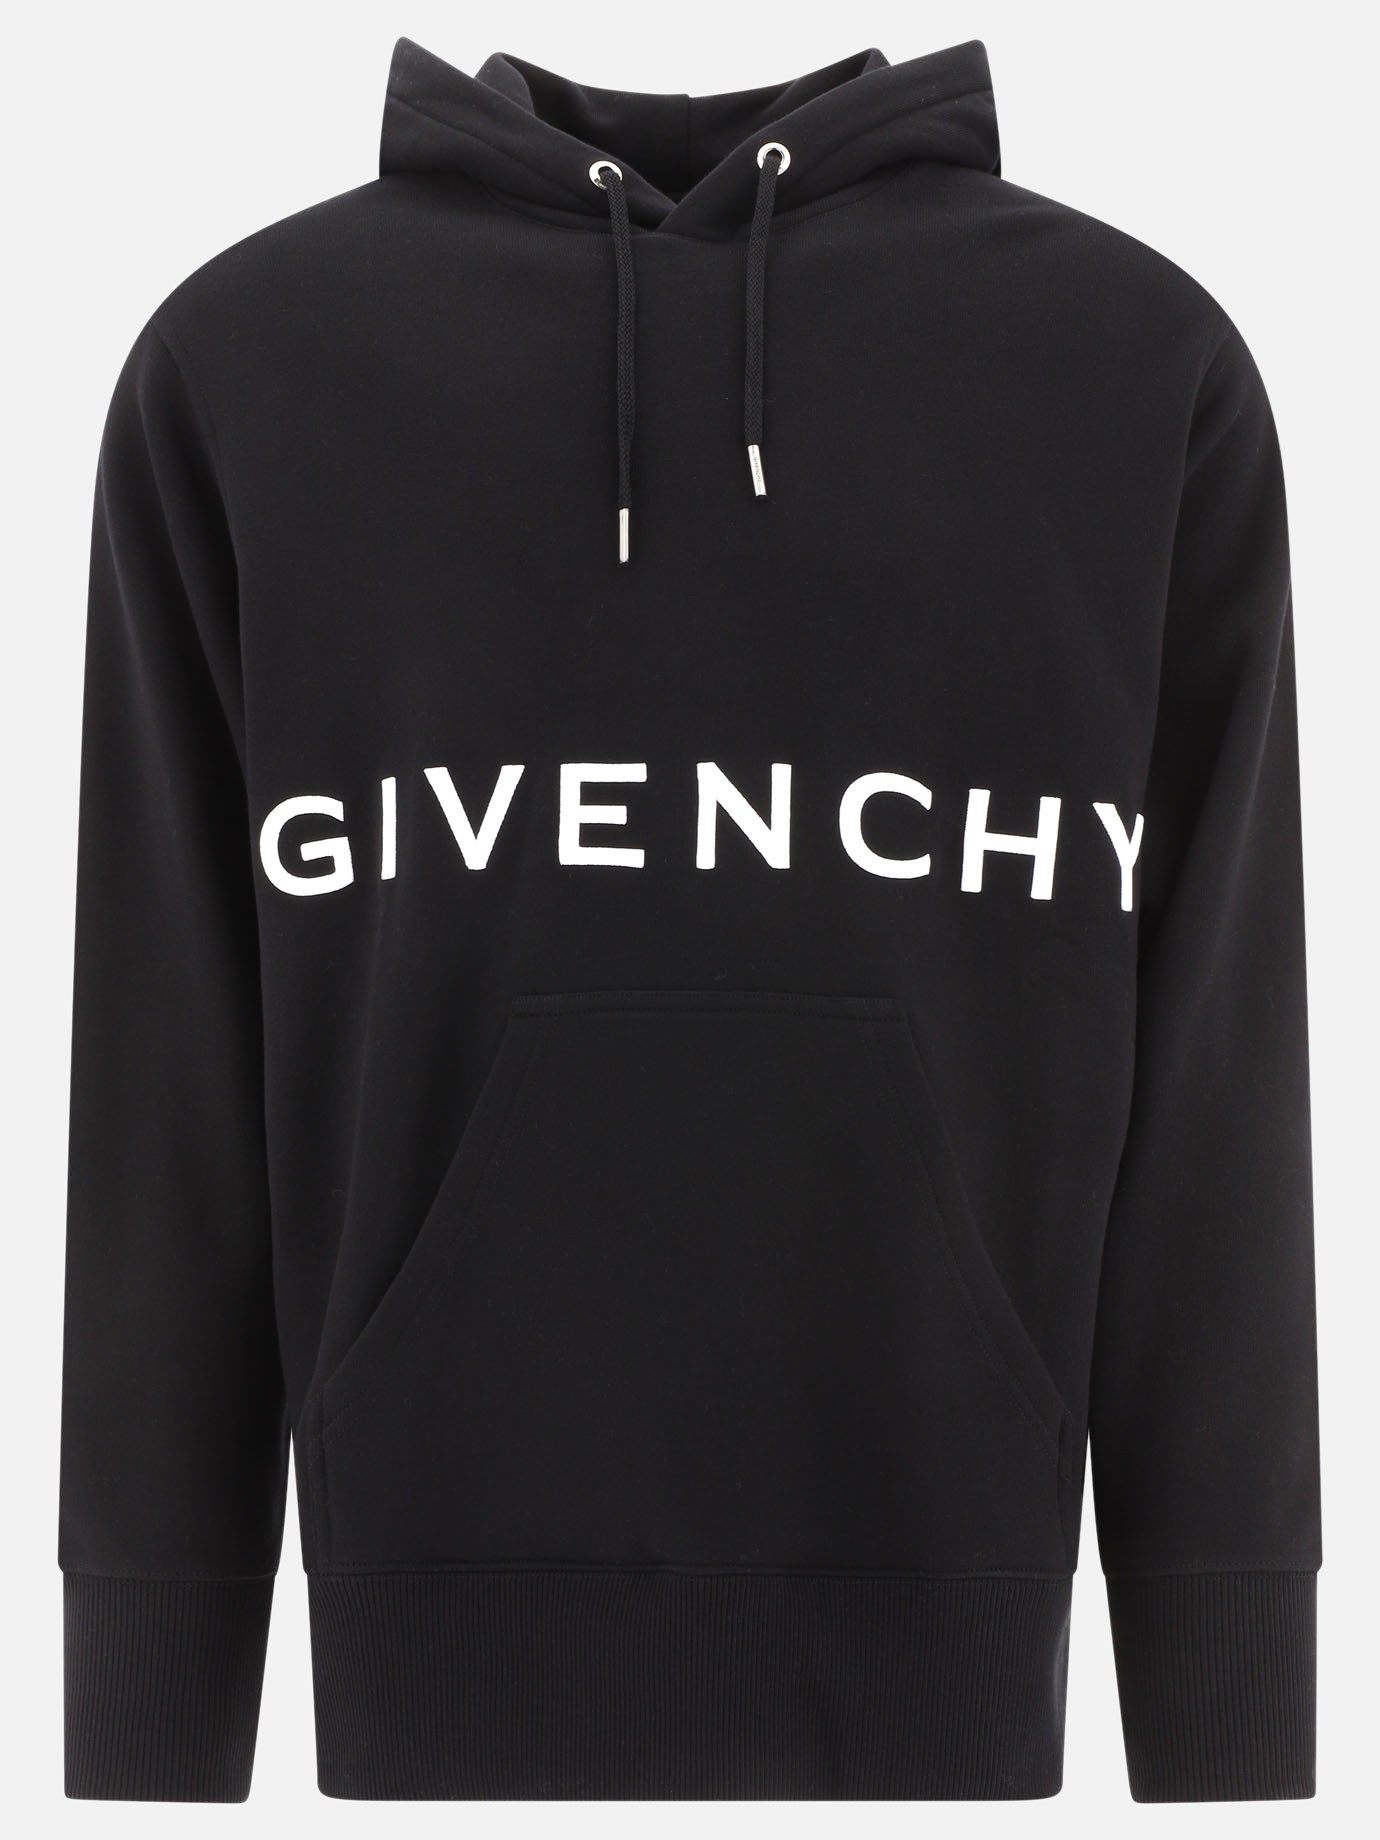  Givenchy 4G  sweatshirtby Givenchy - 2